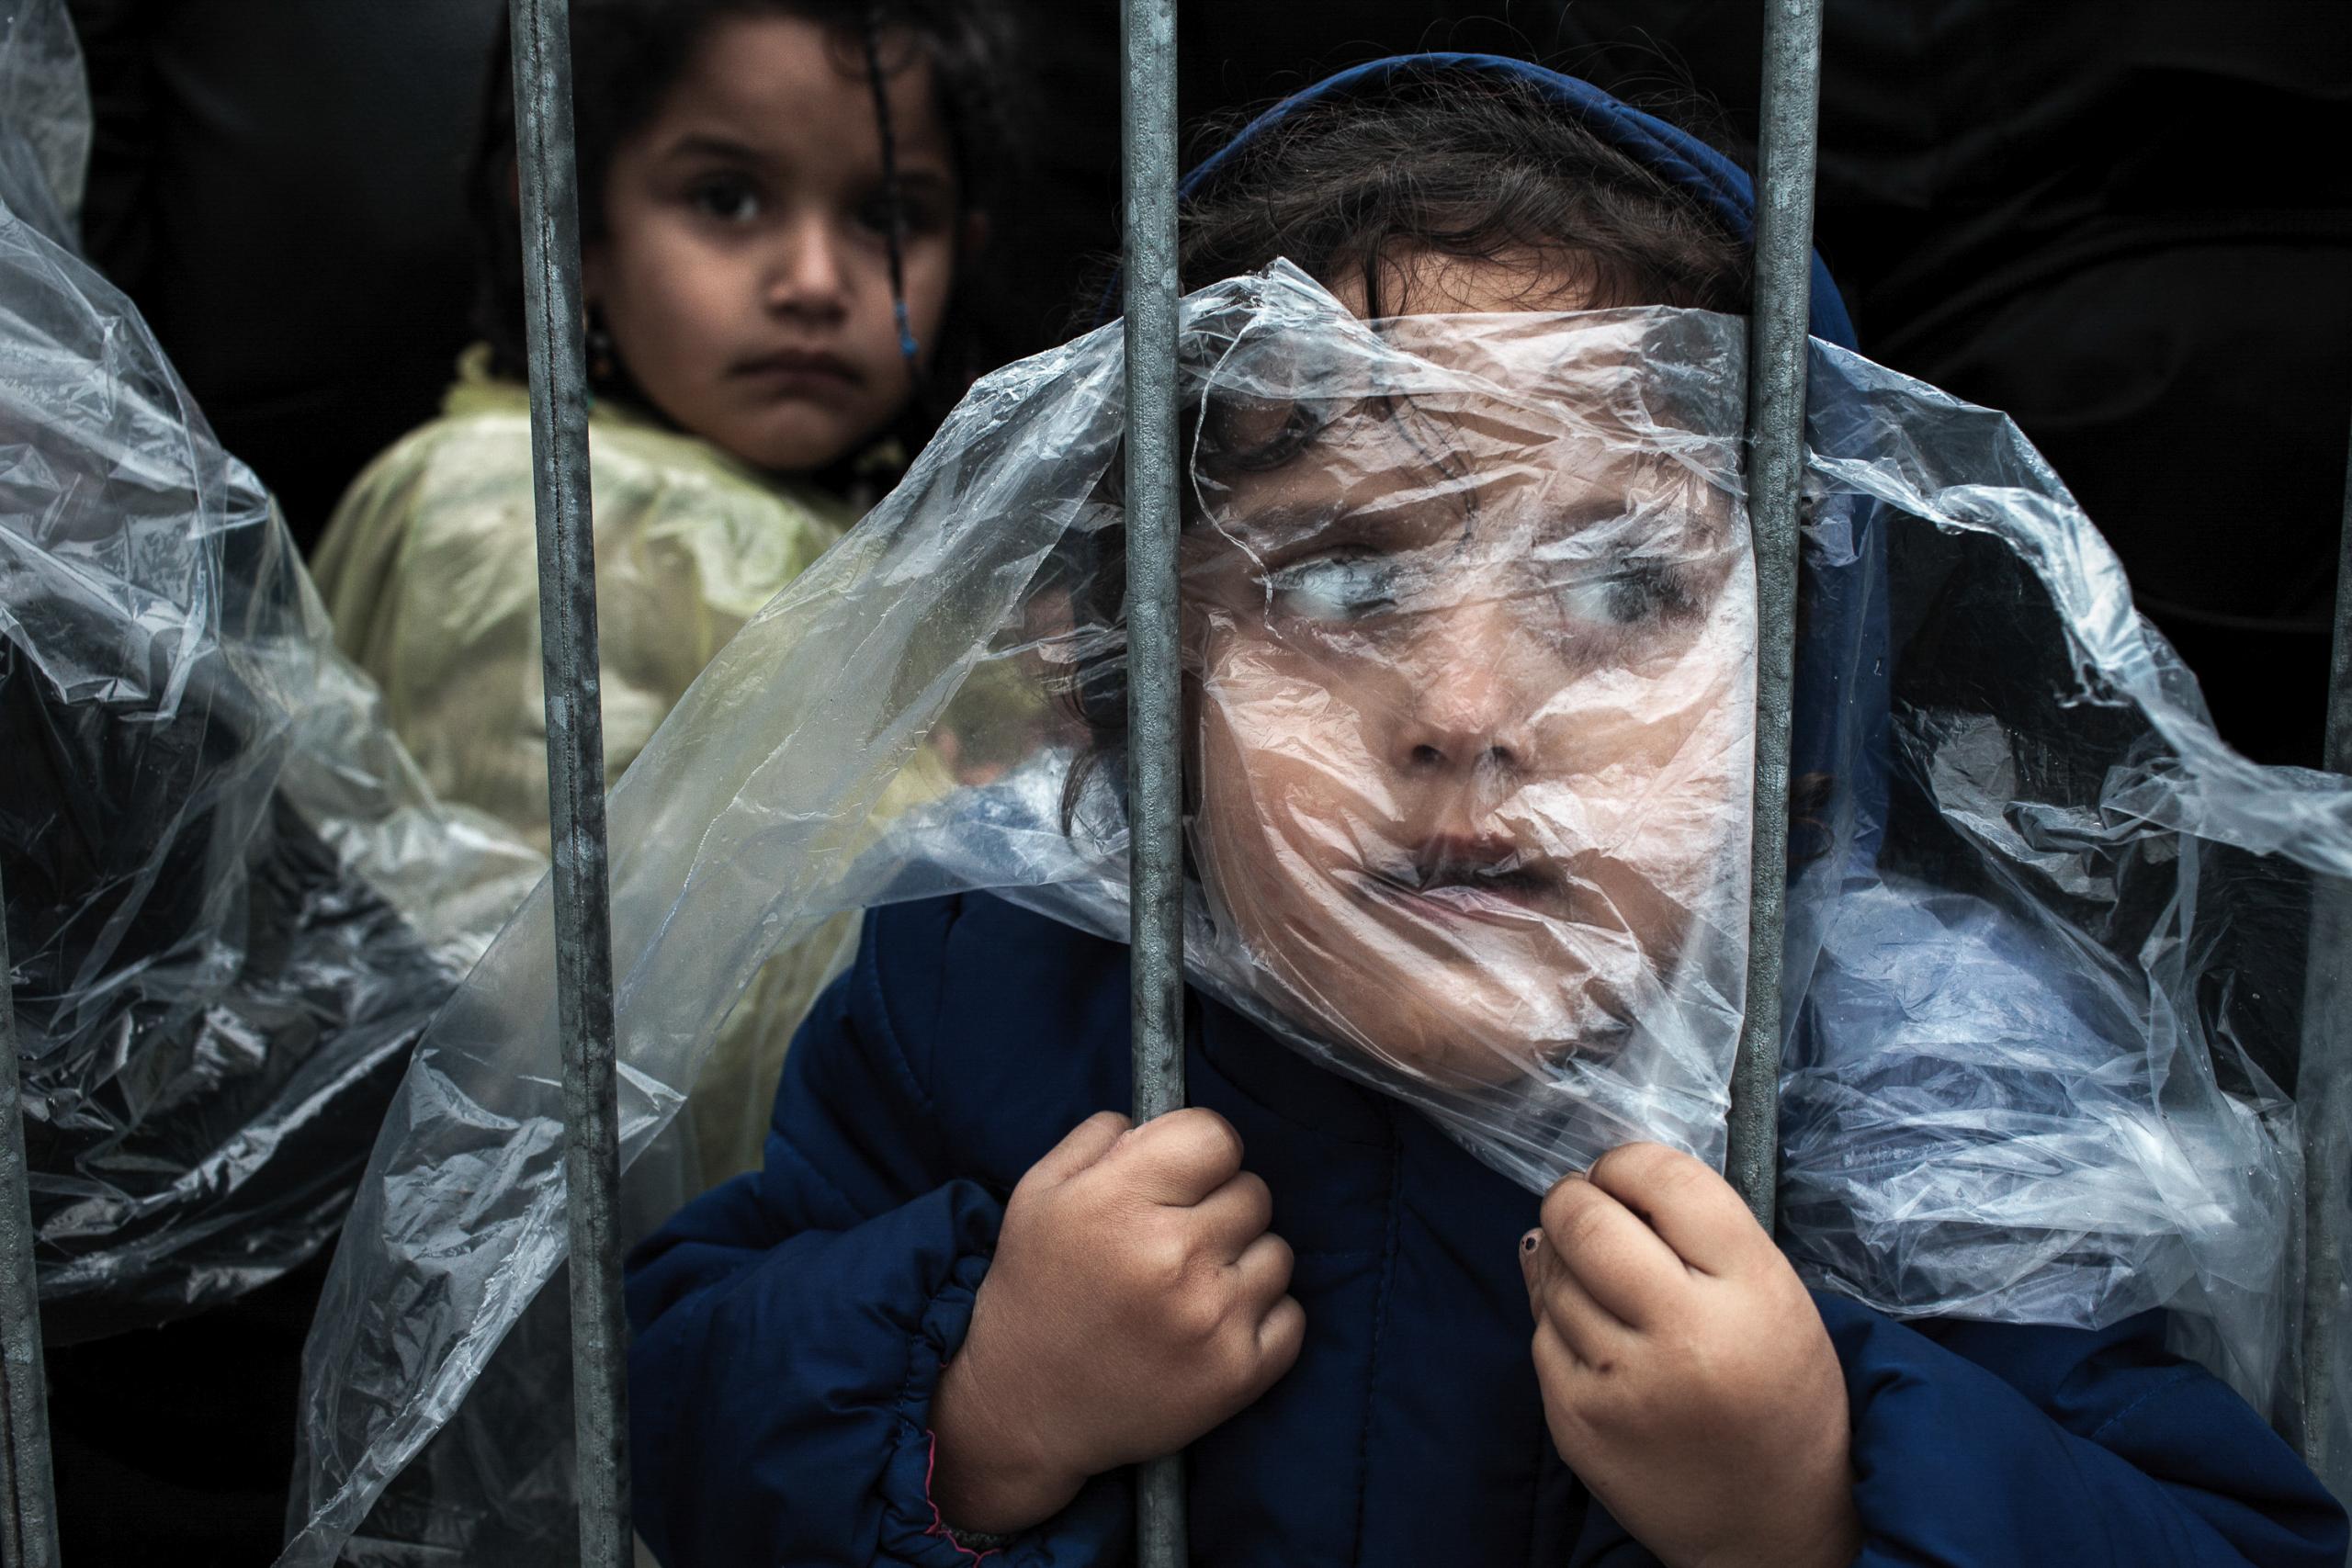 Refugee children covered in rain capes wait in line to be registered. Most refugees who crossed into Serbia continued their journey north, towards countries of the European Union. ©Matic Zorman